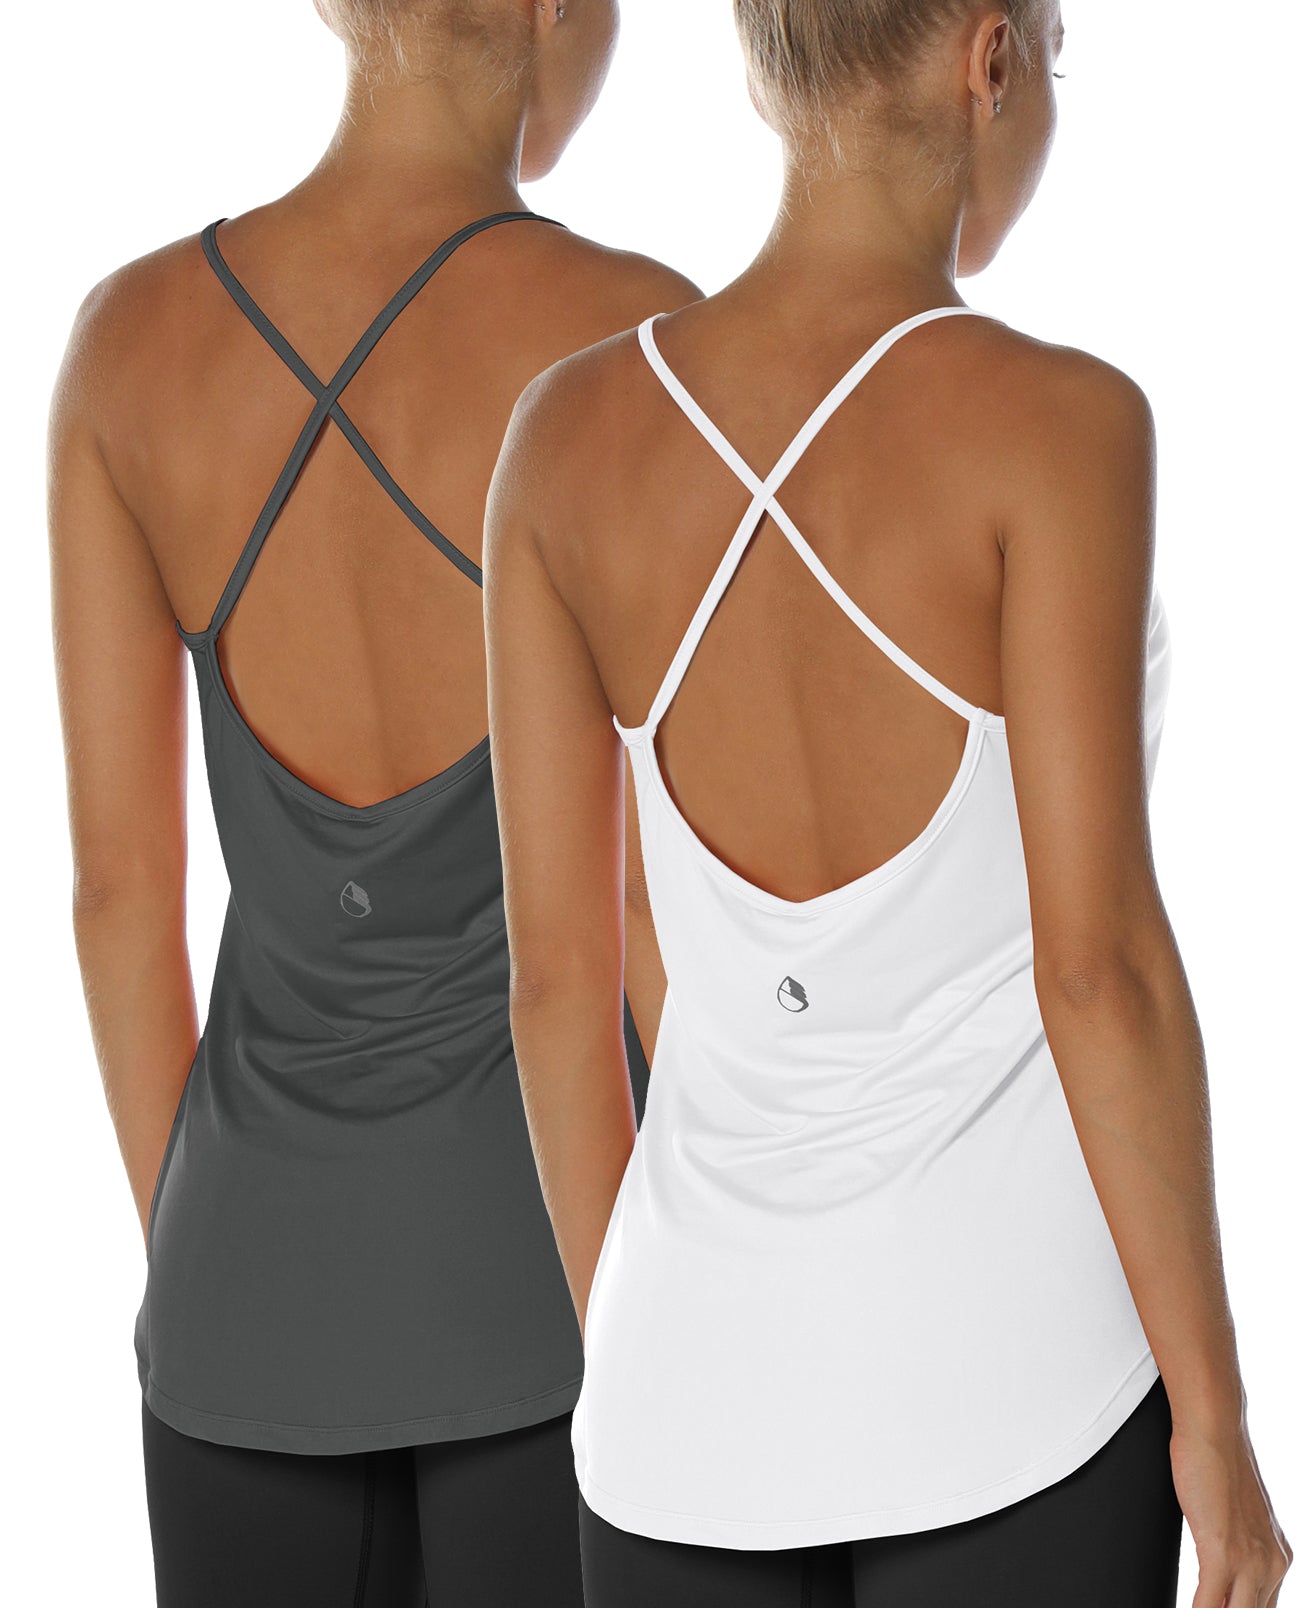  Womens Summer Workout Tops Sexy Backless Yoga Shirts Loose  Open Back Running Sports Tank Tops Cute Muscle Tank Sleeveless Gym Fitness  Quick Dry Activewear Clothes For Juniors LightBlue XL